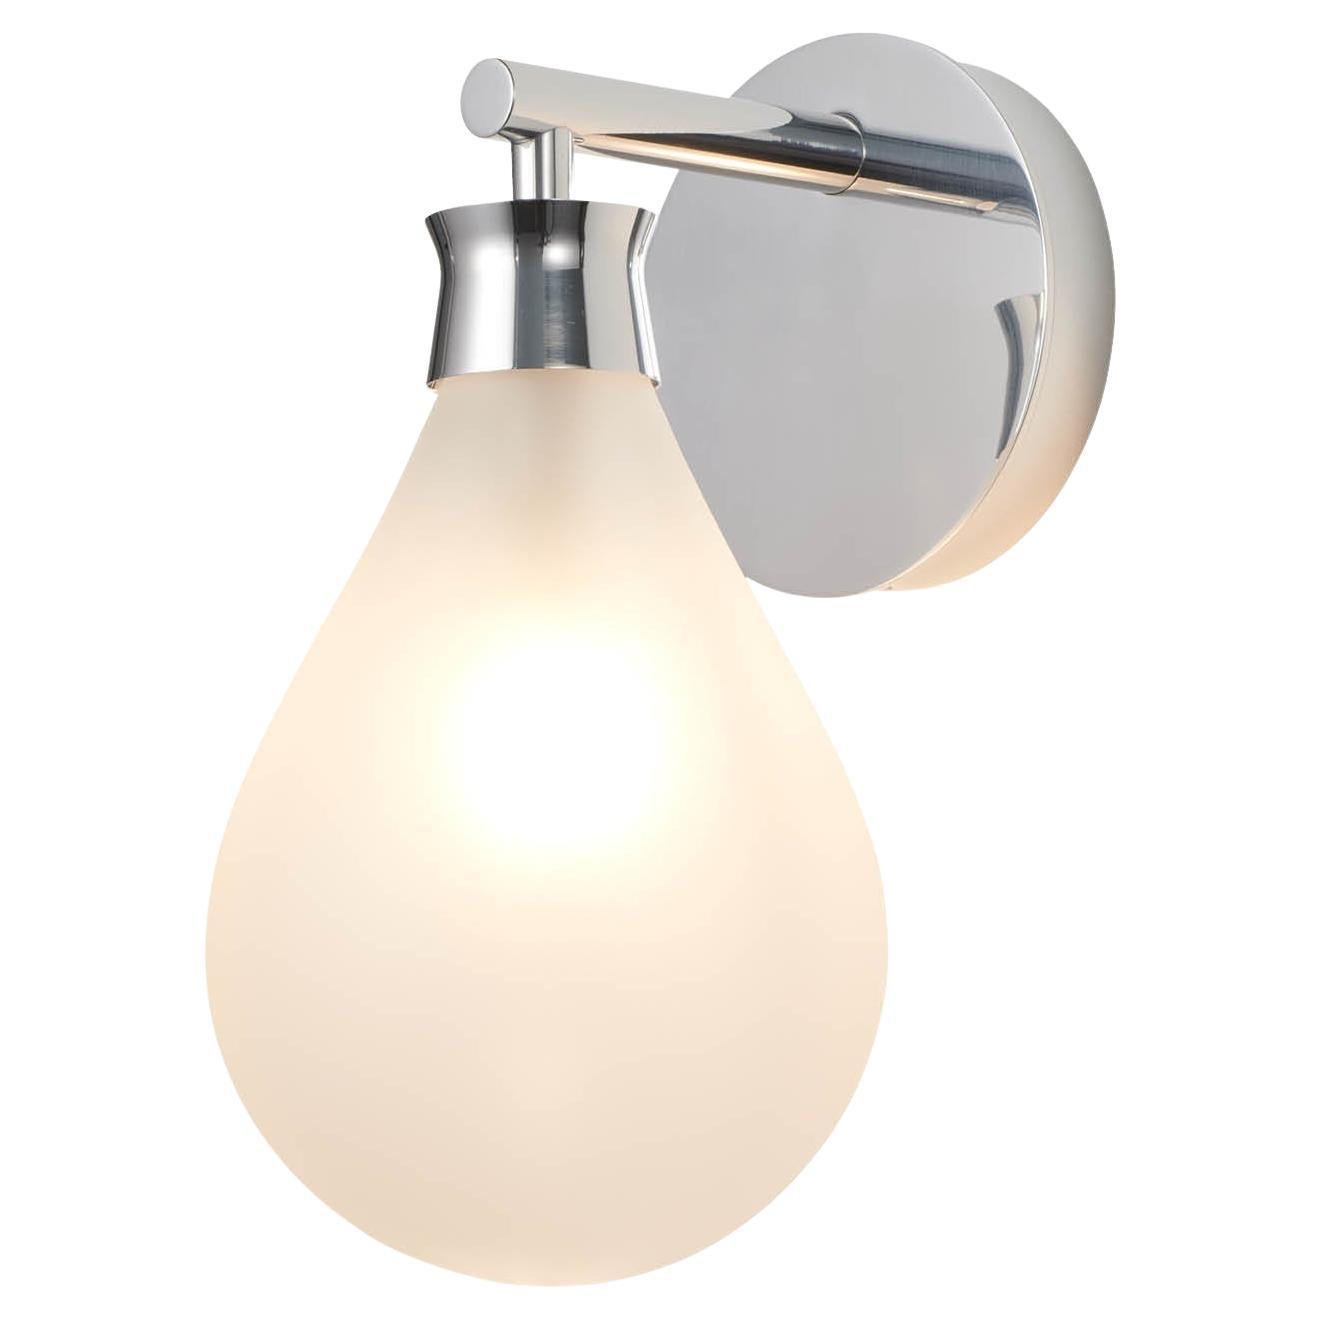 Cintola Wall Light in Polished Aluminium with Frosted Handblown Glass Globe